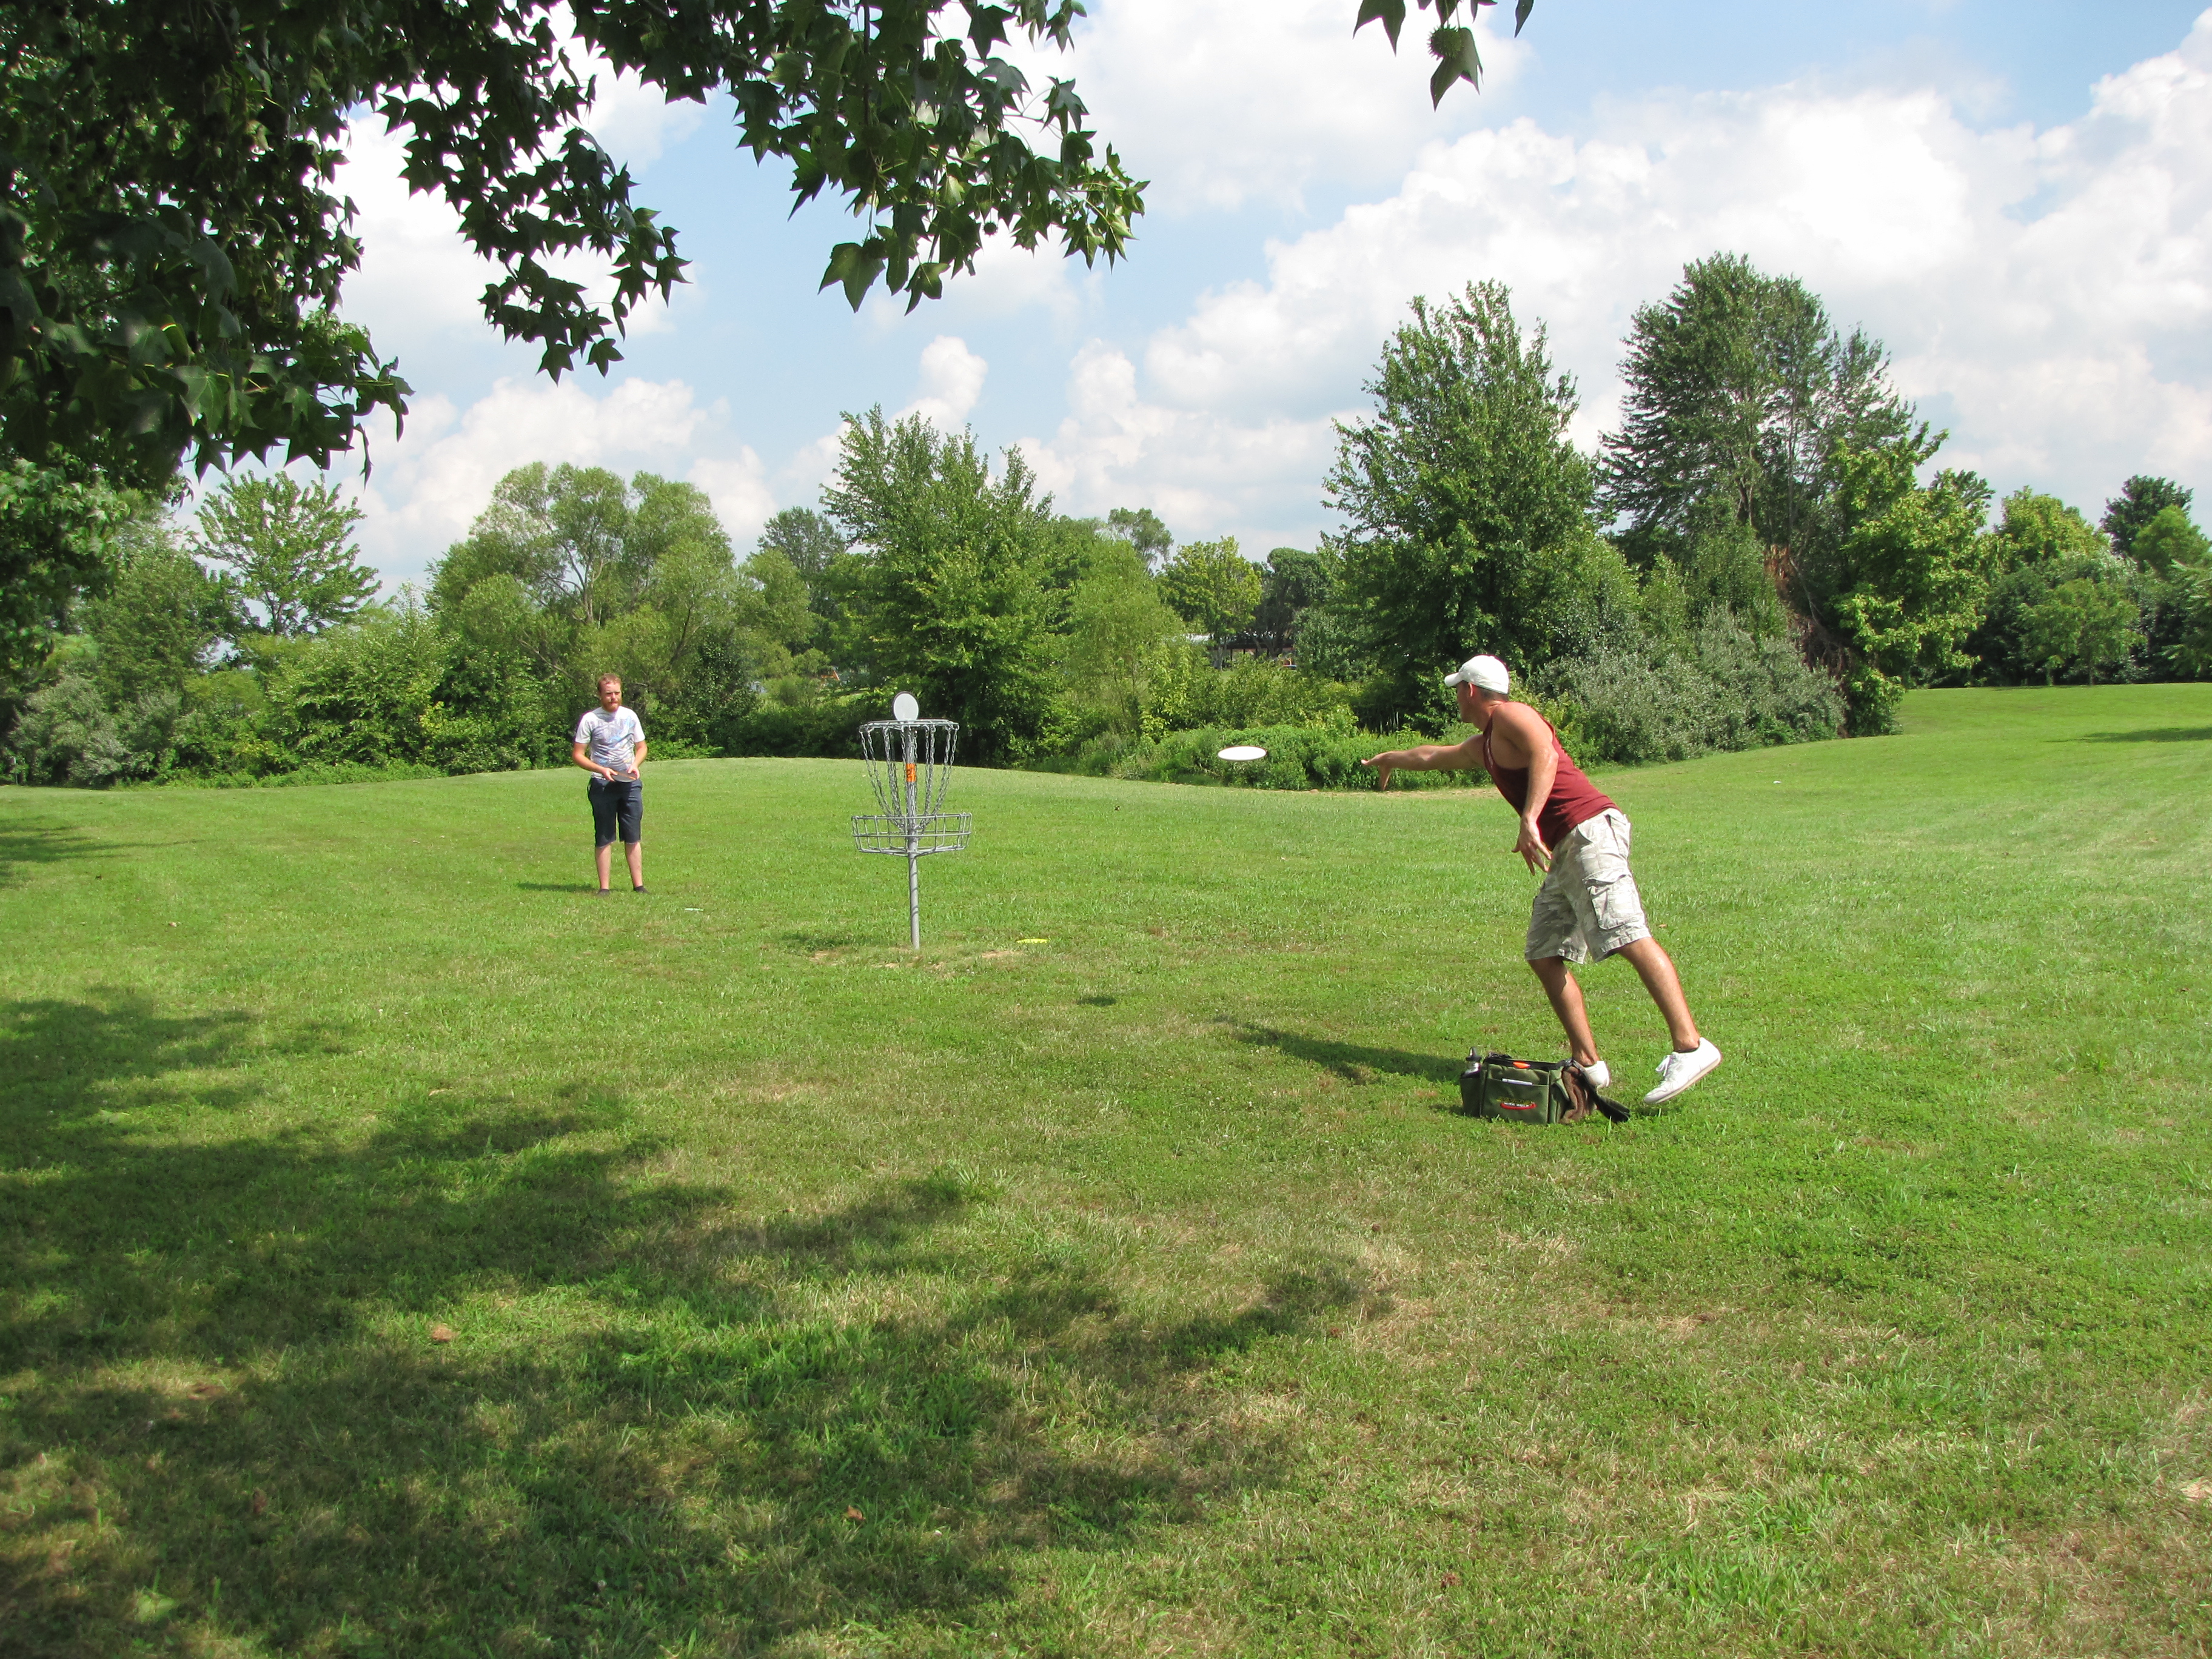 Enjoy Disc Golf in ILLINOISouth 